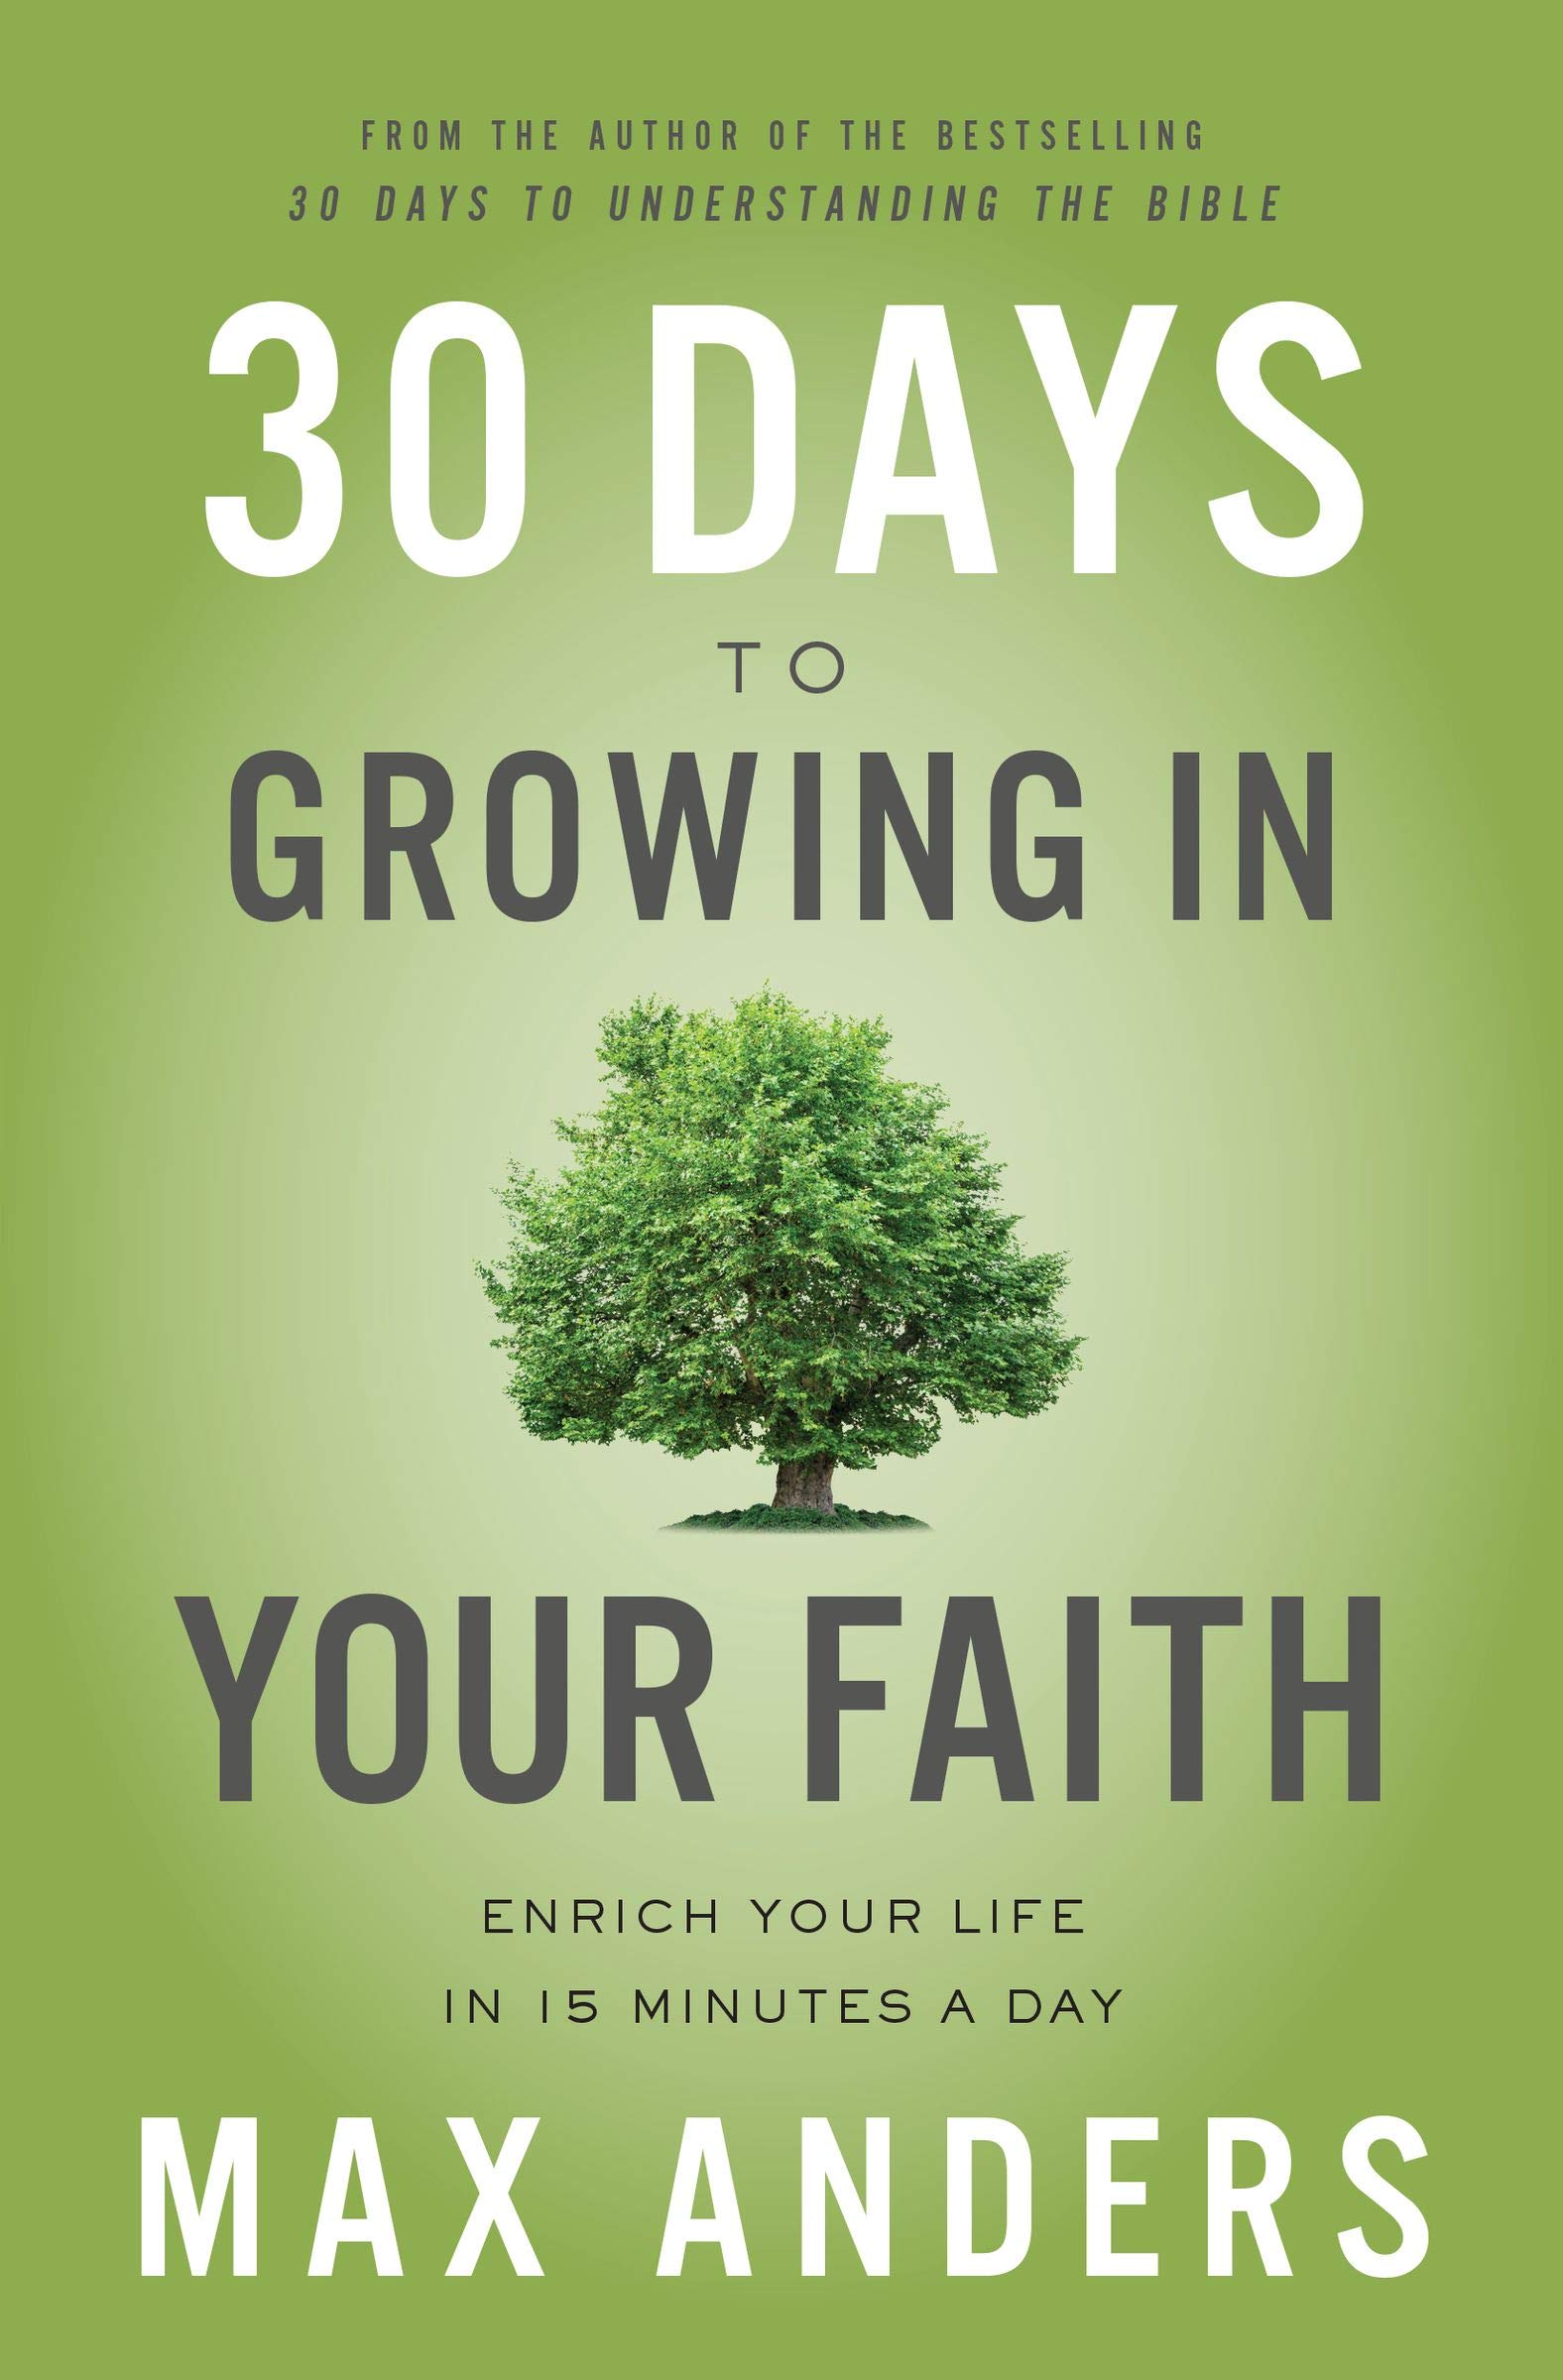 30 DAYS TO GROWING YOUR FAITH